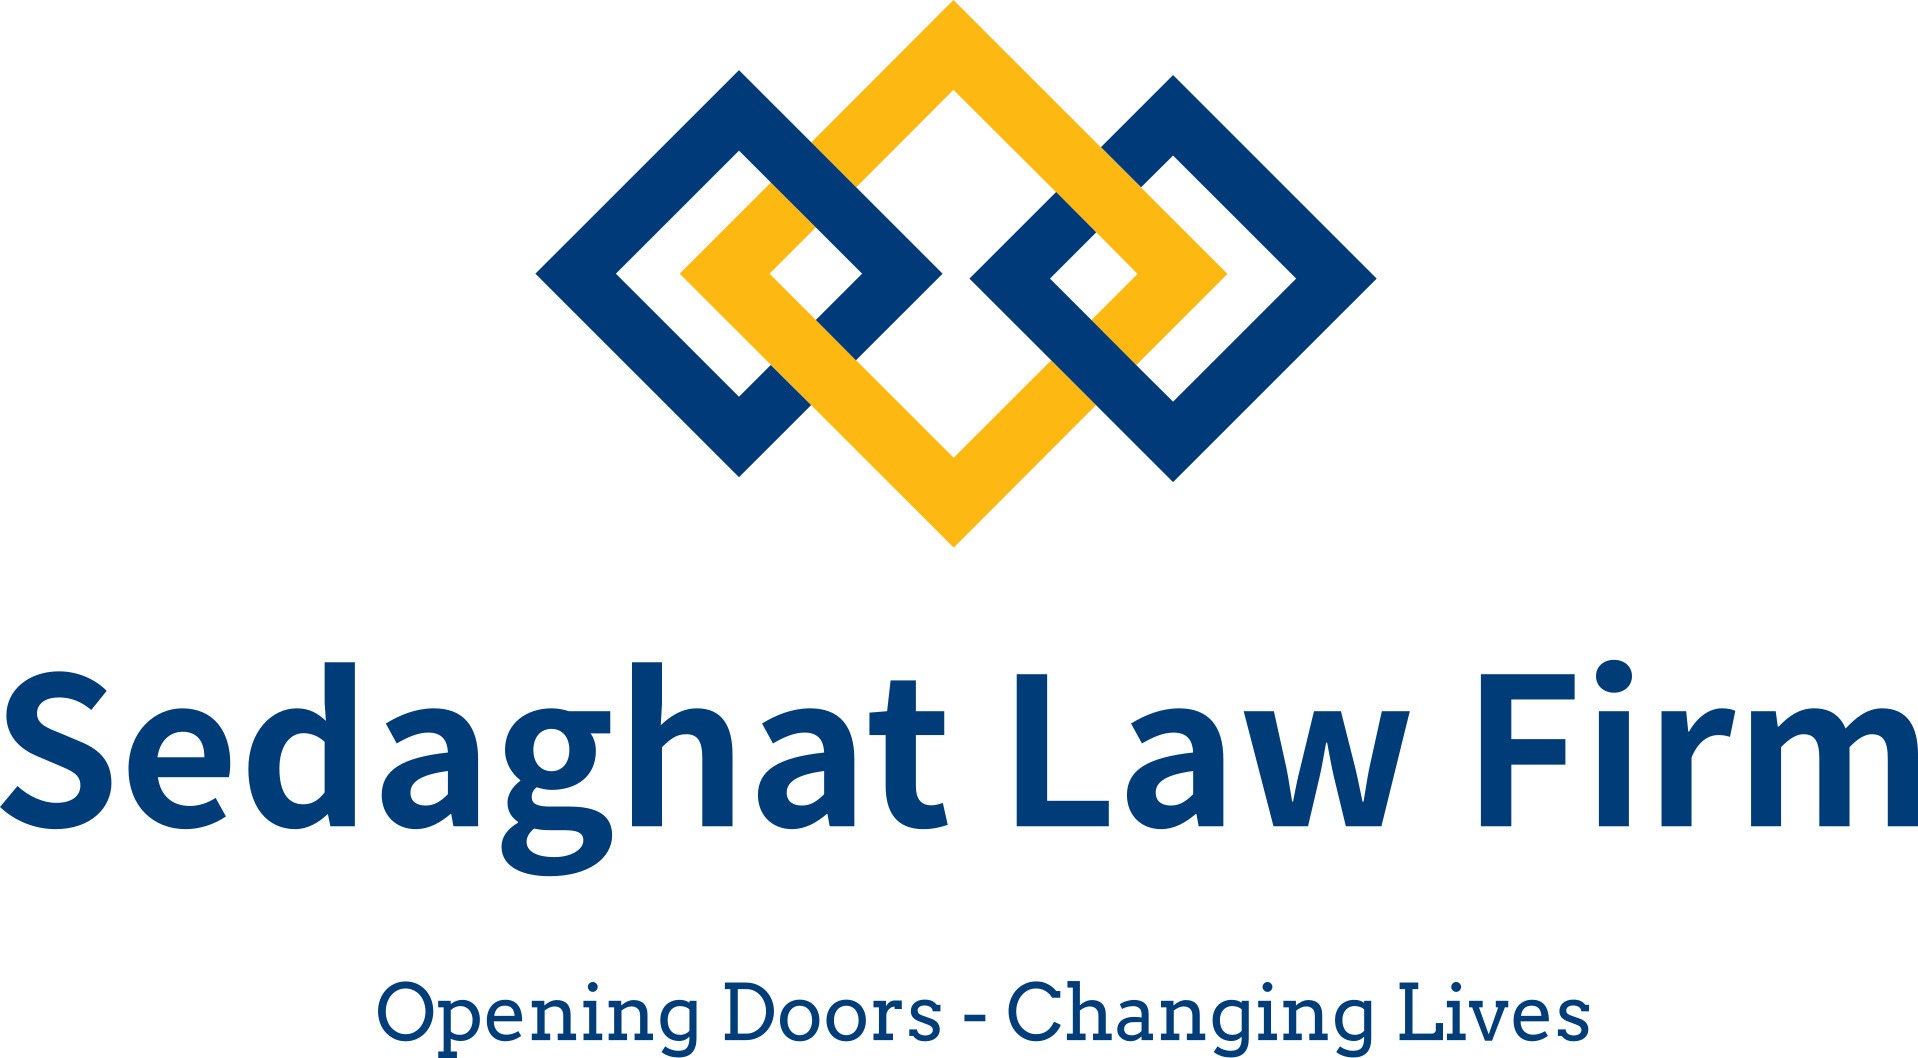 The Sedaghat Law Firm